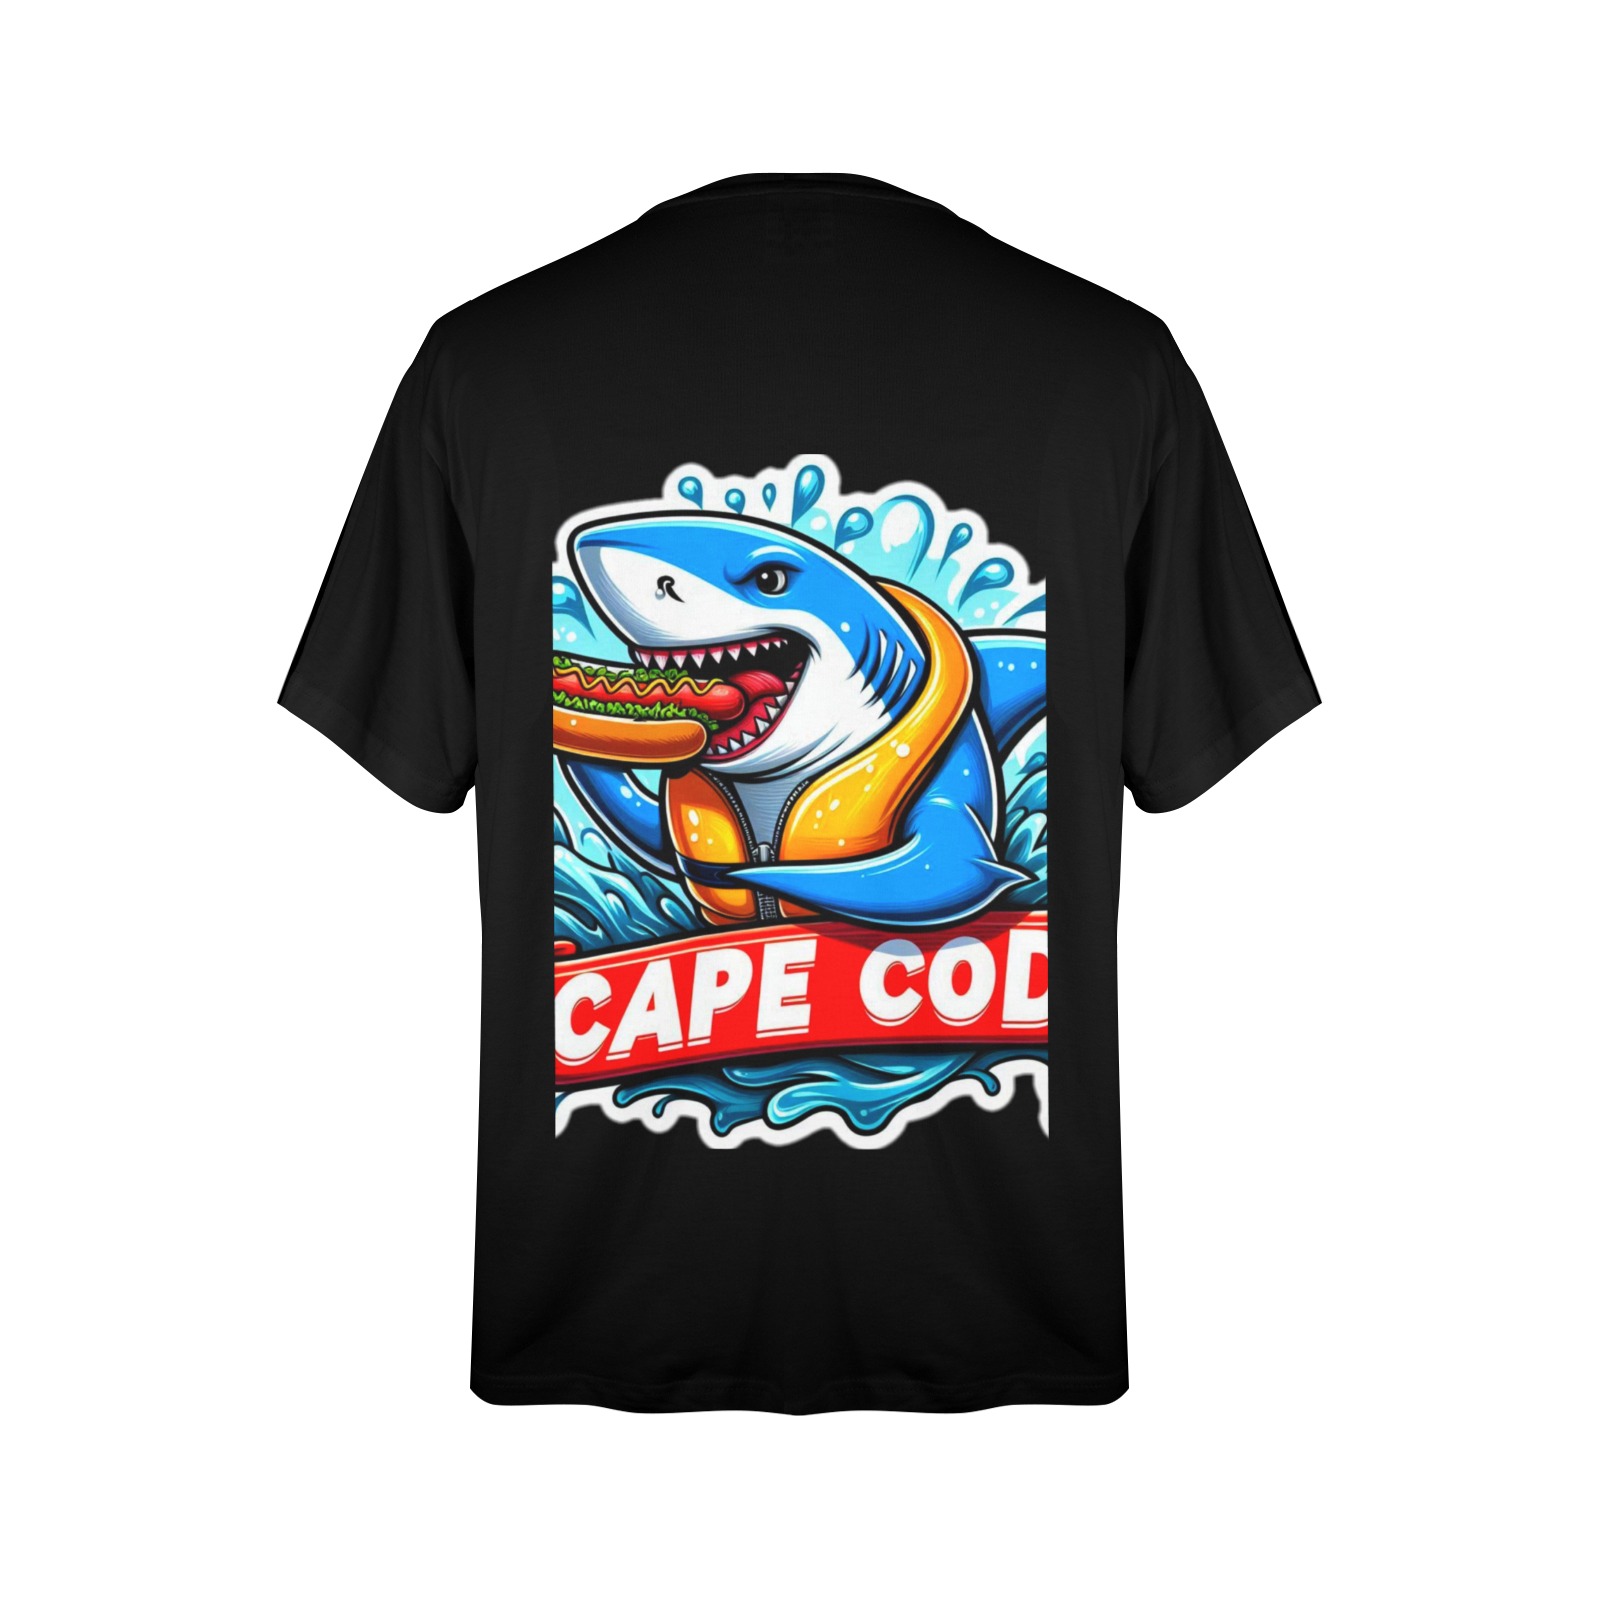 CAPE COD-GREAT WHITE EATING HOT DOG 3 Men's Glow in the Dark T-shirt (Two Sides Printing)